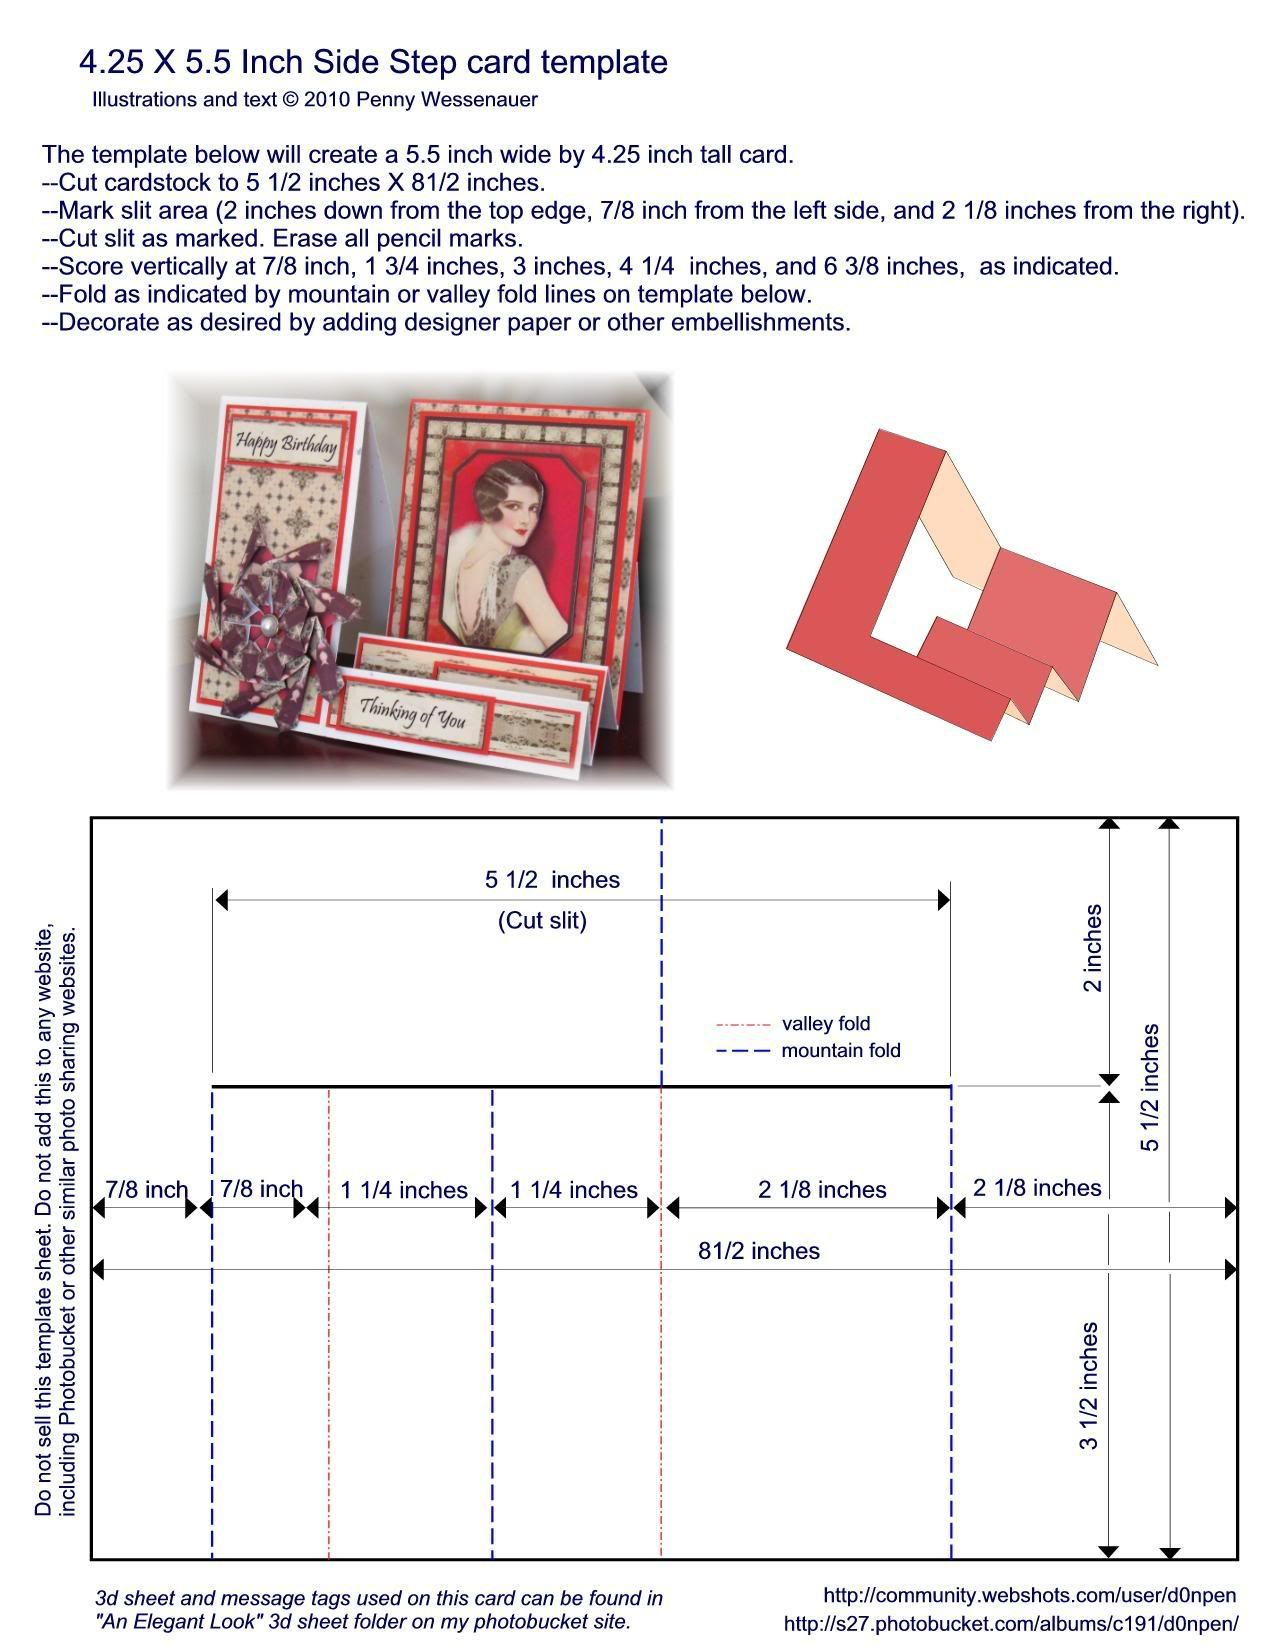 A2 (4.25 X 5.5) Side Step Card Template | Patterns For Card Regarding A2 Card Template